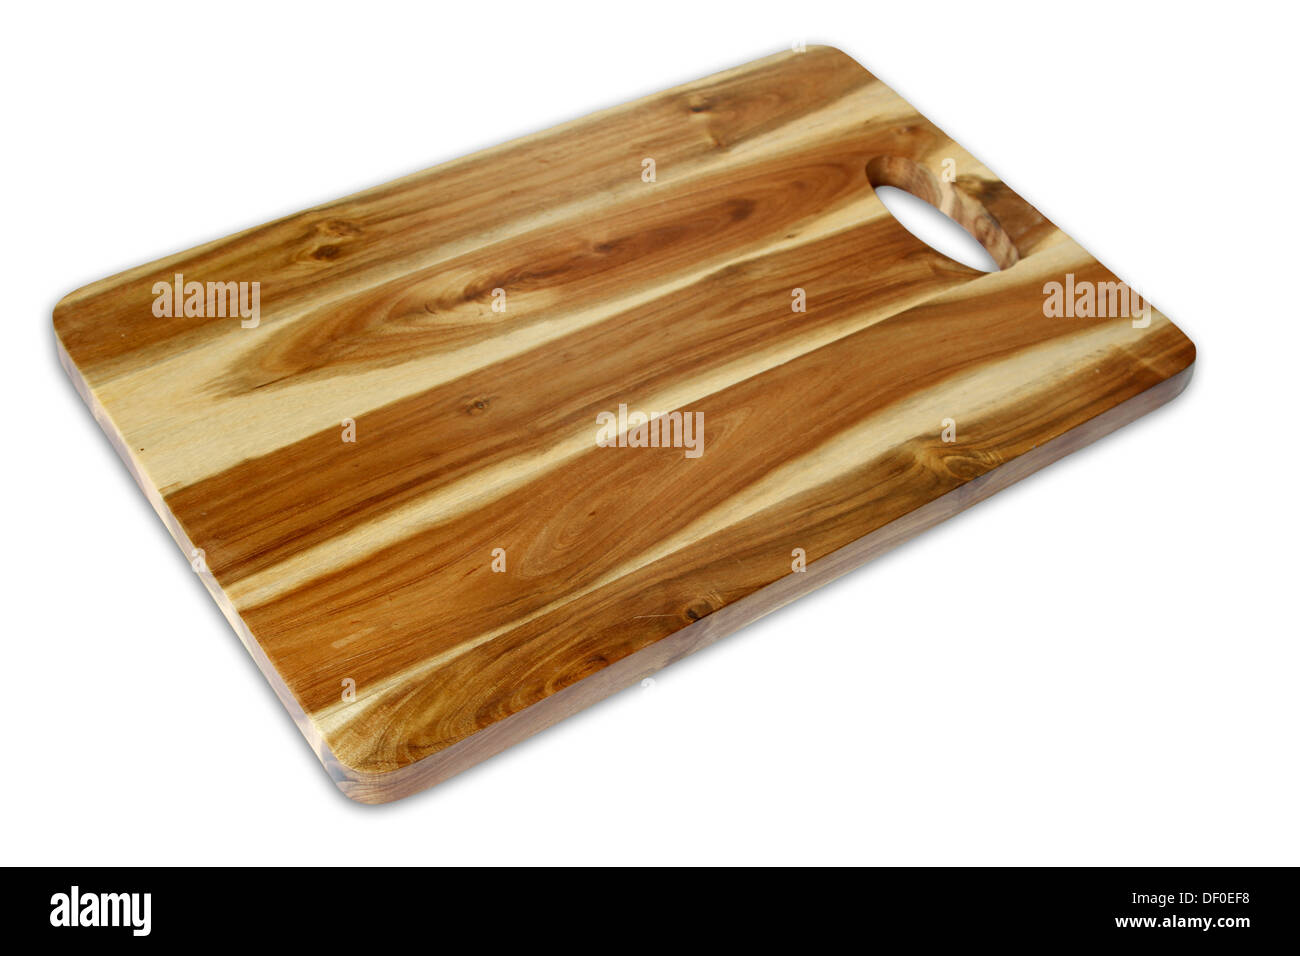 New chopping board isolated on plain background Stock Photo